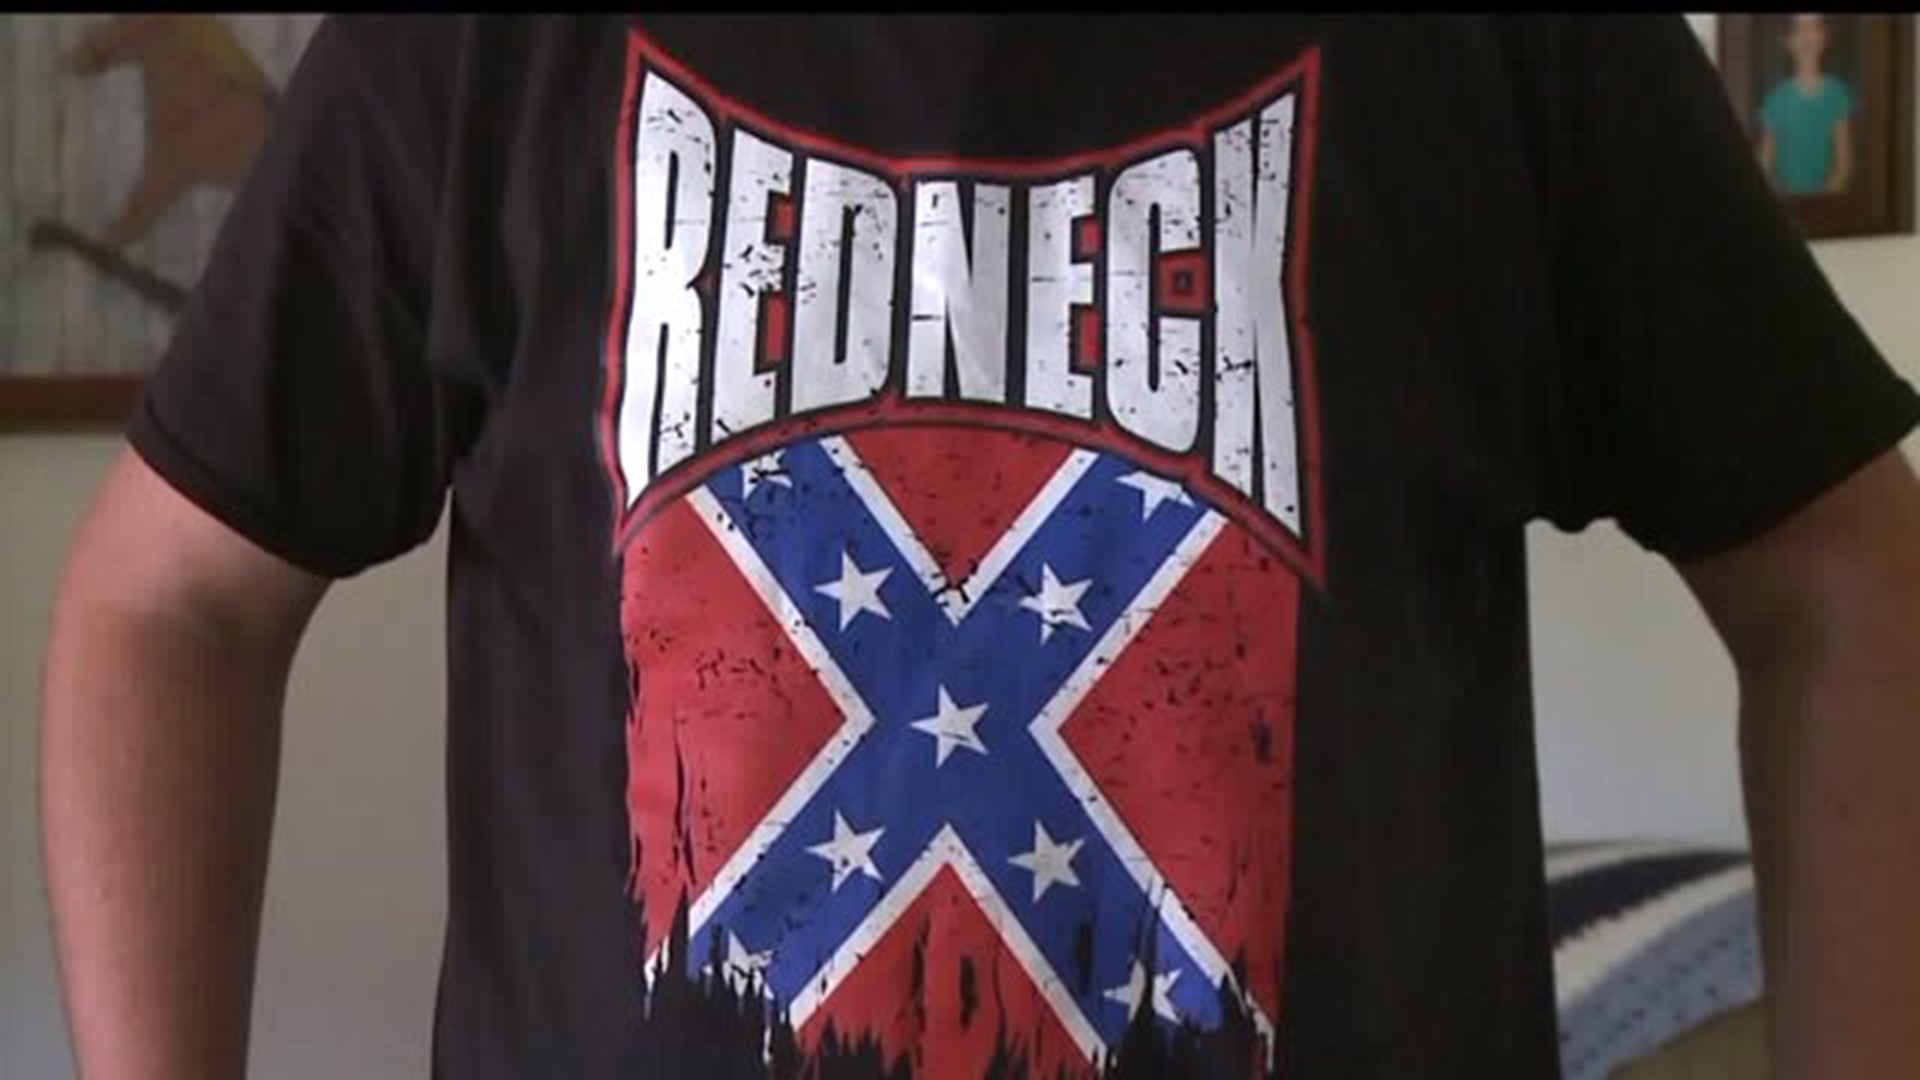 Confederate flag shirt controversy and school